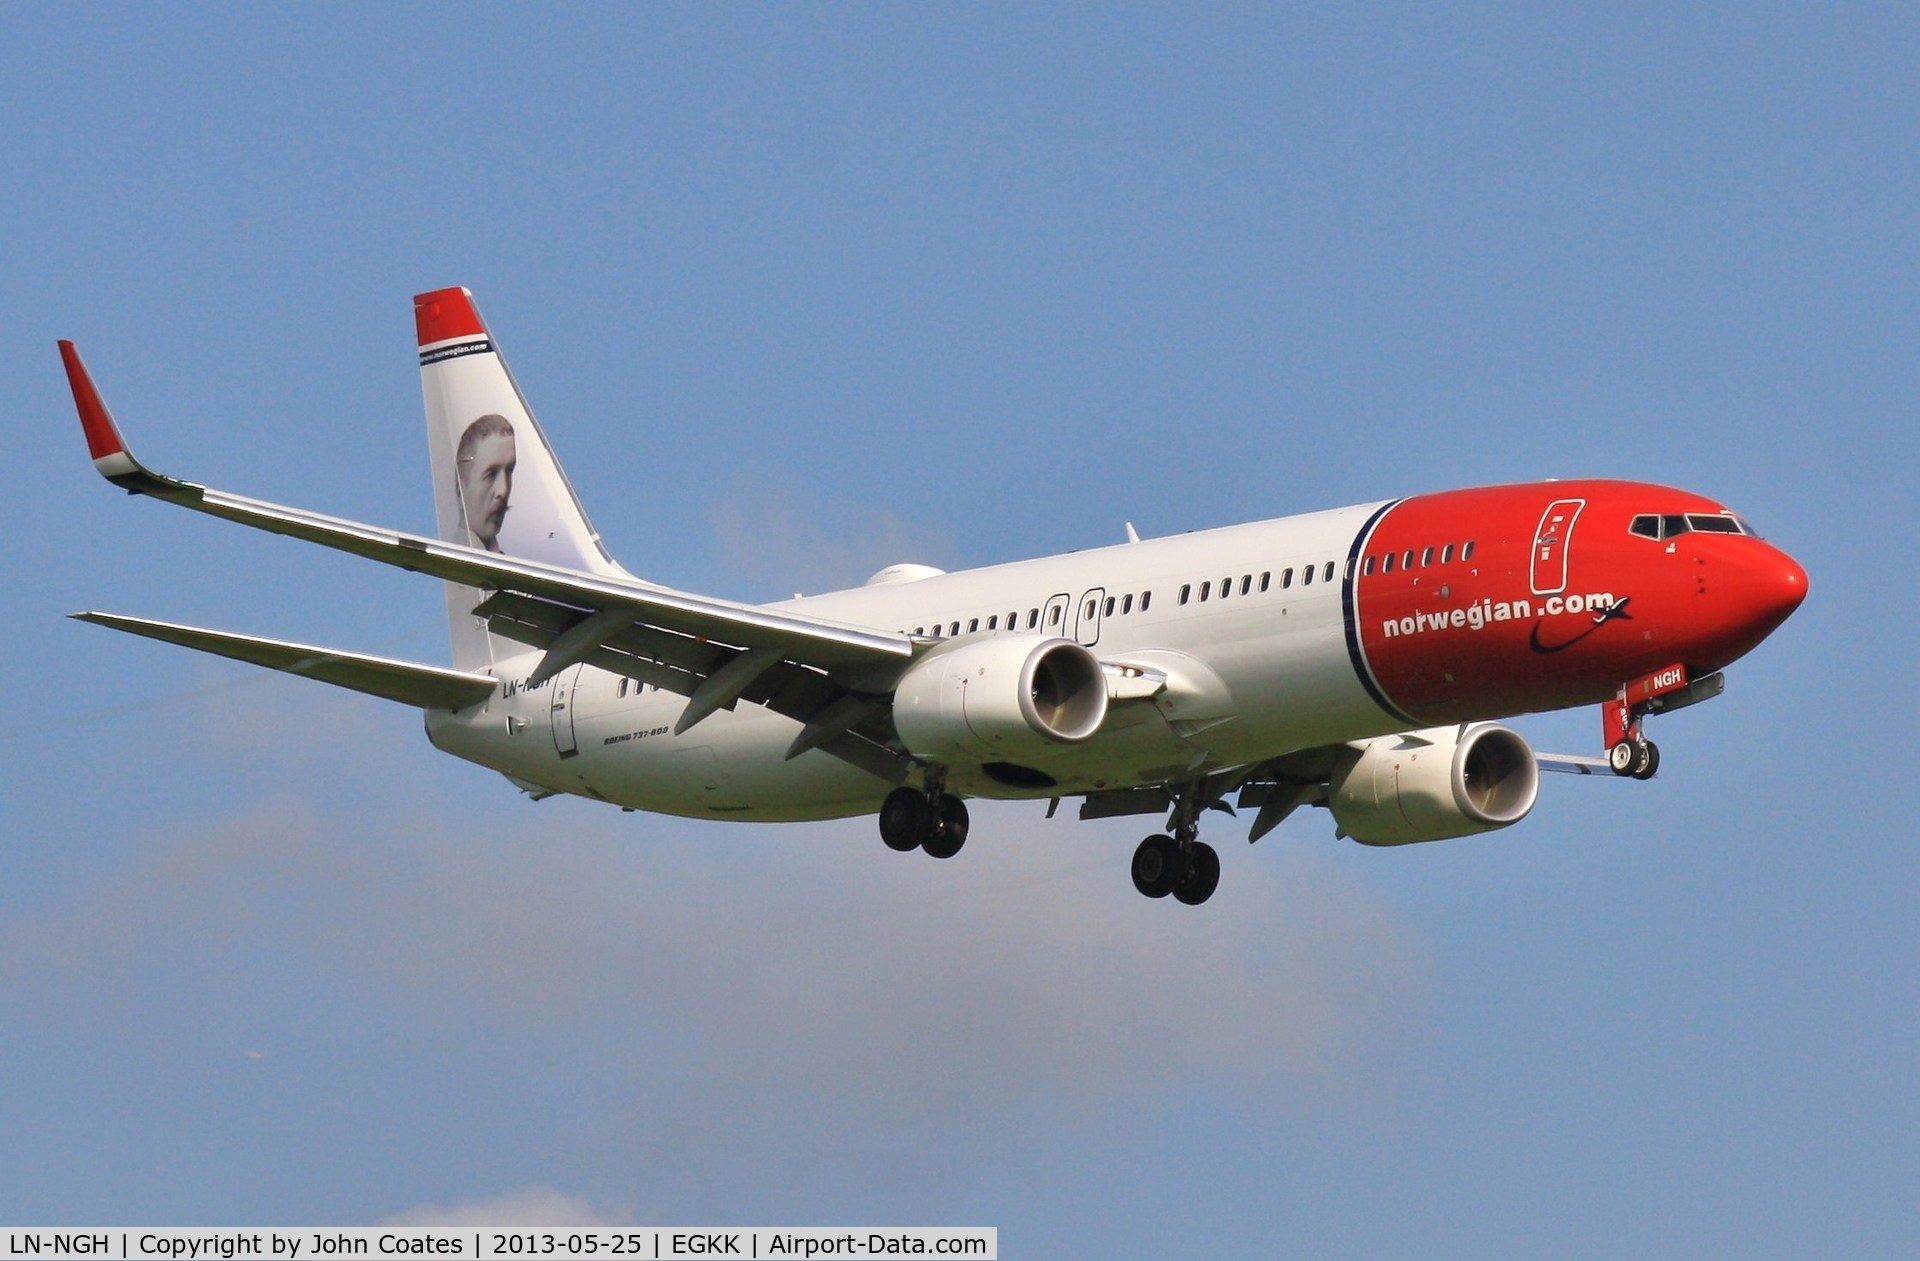 LN-NGH, 2012 Boeing 737-8JP C/N 39019, On approach to 08R